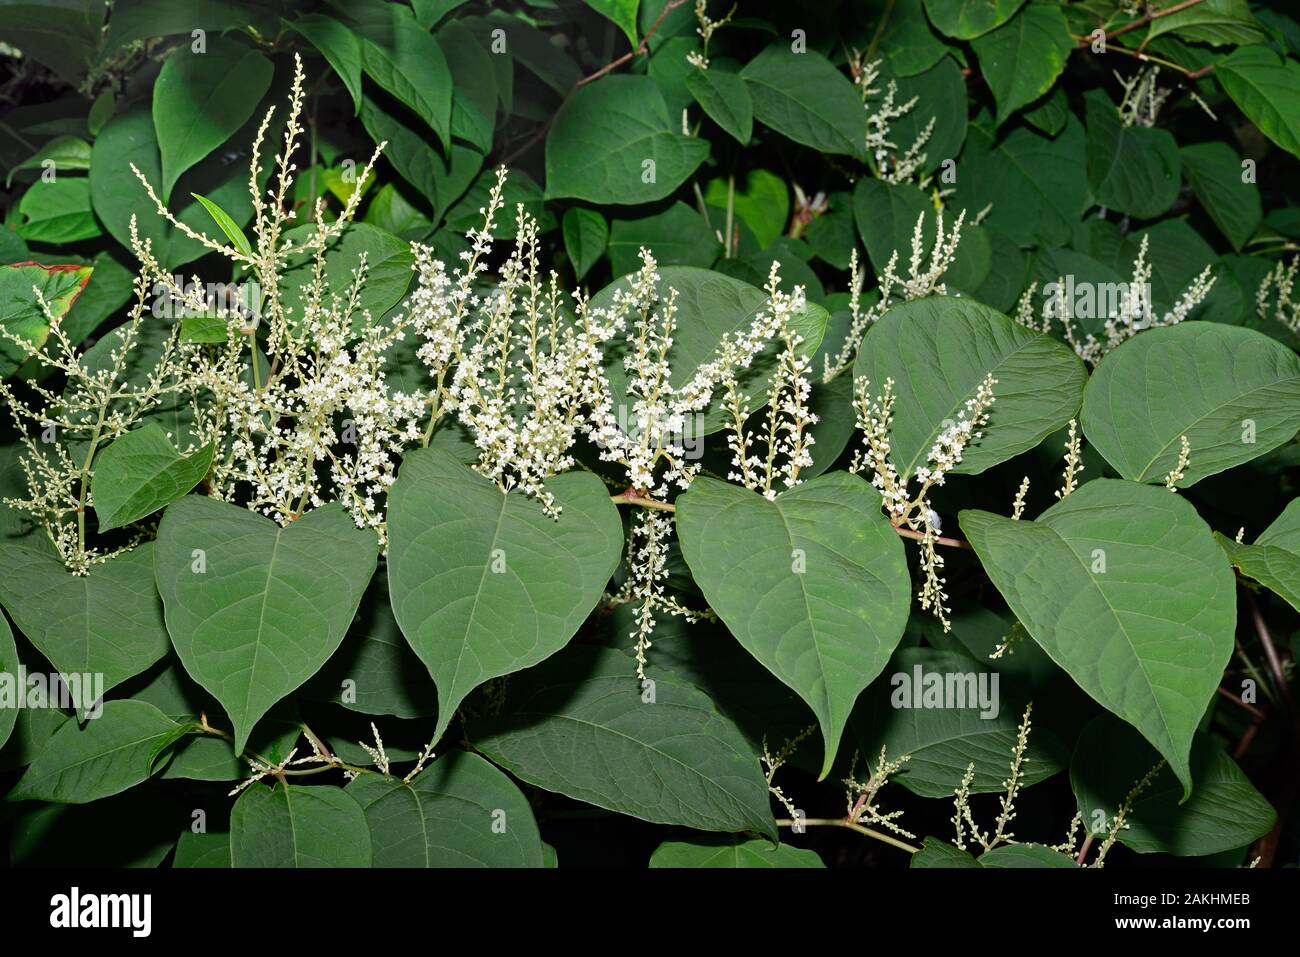 Reynoutria japonica (Japanese knotweed) is native to East Asia growing in wetlands and disturbed areas including volcanic soils high in sulphur. Stock Photo